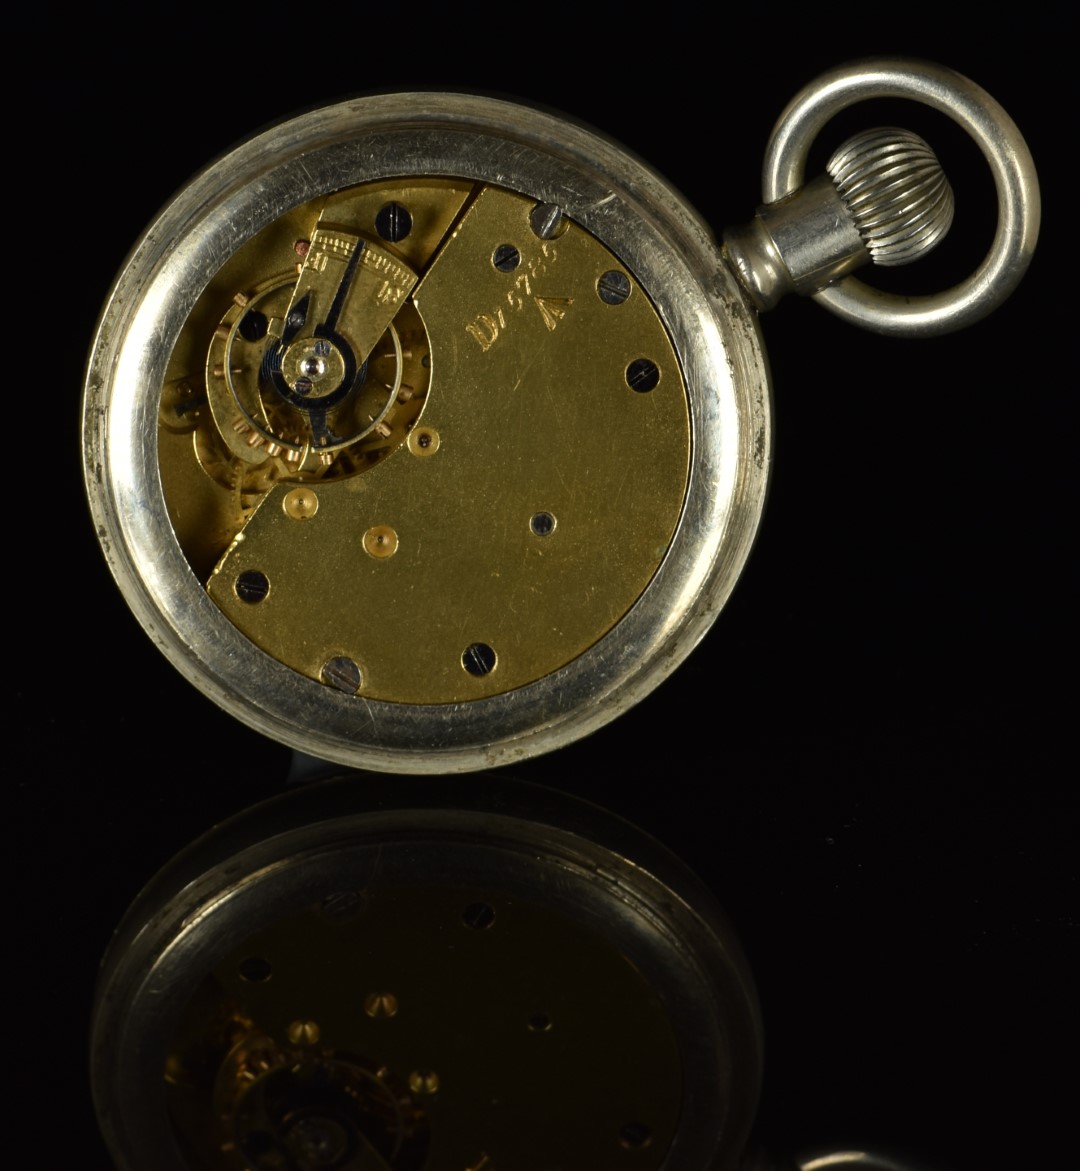 W Eberhard of London keyless winding open faced military pocket watch with subsidiary seconds - Image 3 of 3